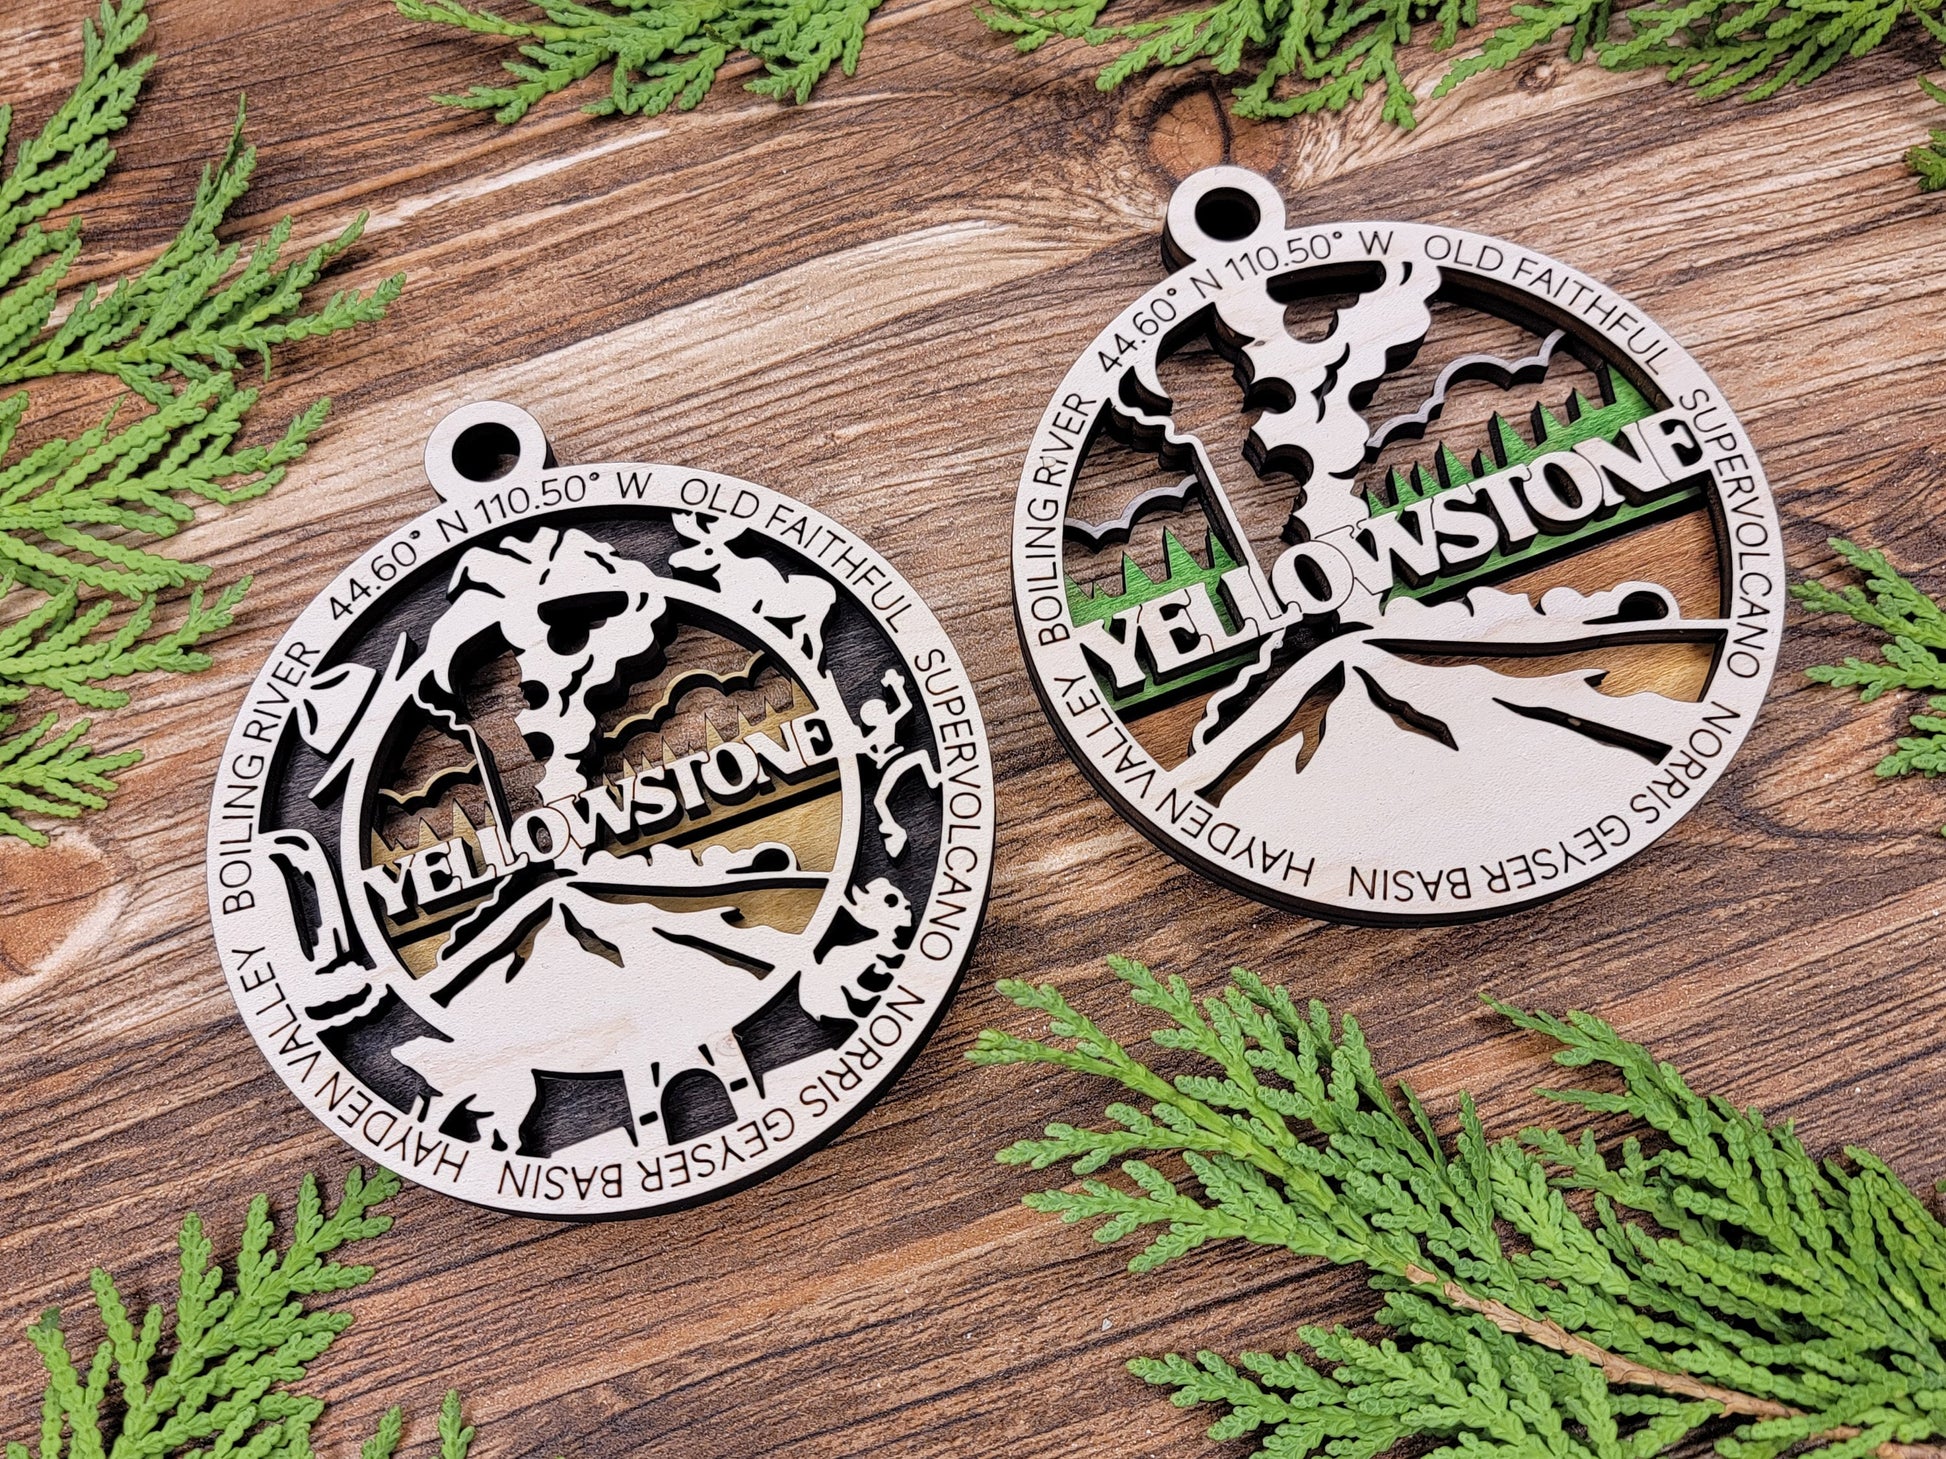 Yellowstone Park Ornament - Includes 2 Ornaments - Laser Design SVG, PDF, AI File Download - Tested On Glowforge and LightBurn